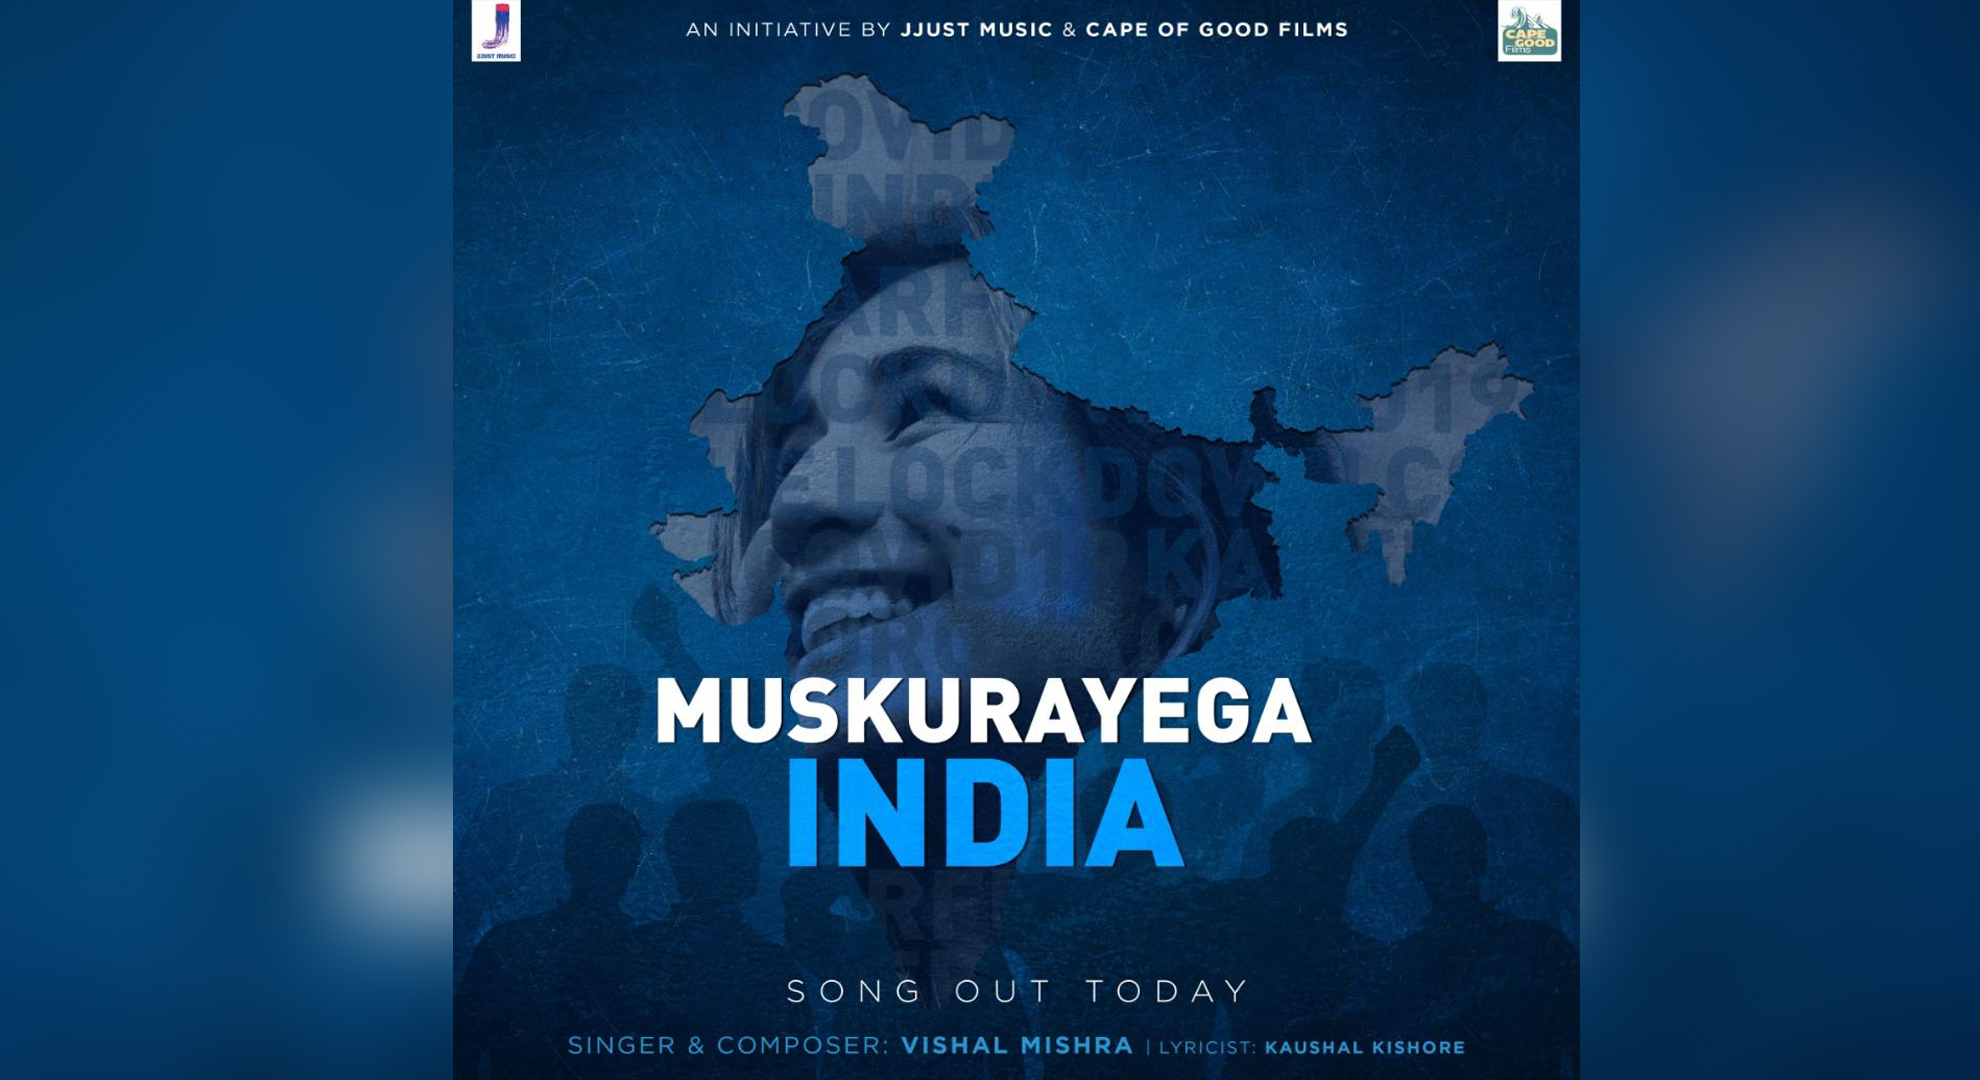 Fraternity comes together for Bollywood’s new anthem of Hope ‘’Muskurayega India’, brought by Jjust Music and Cape of good films, poster out now